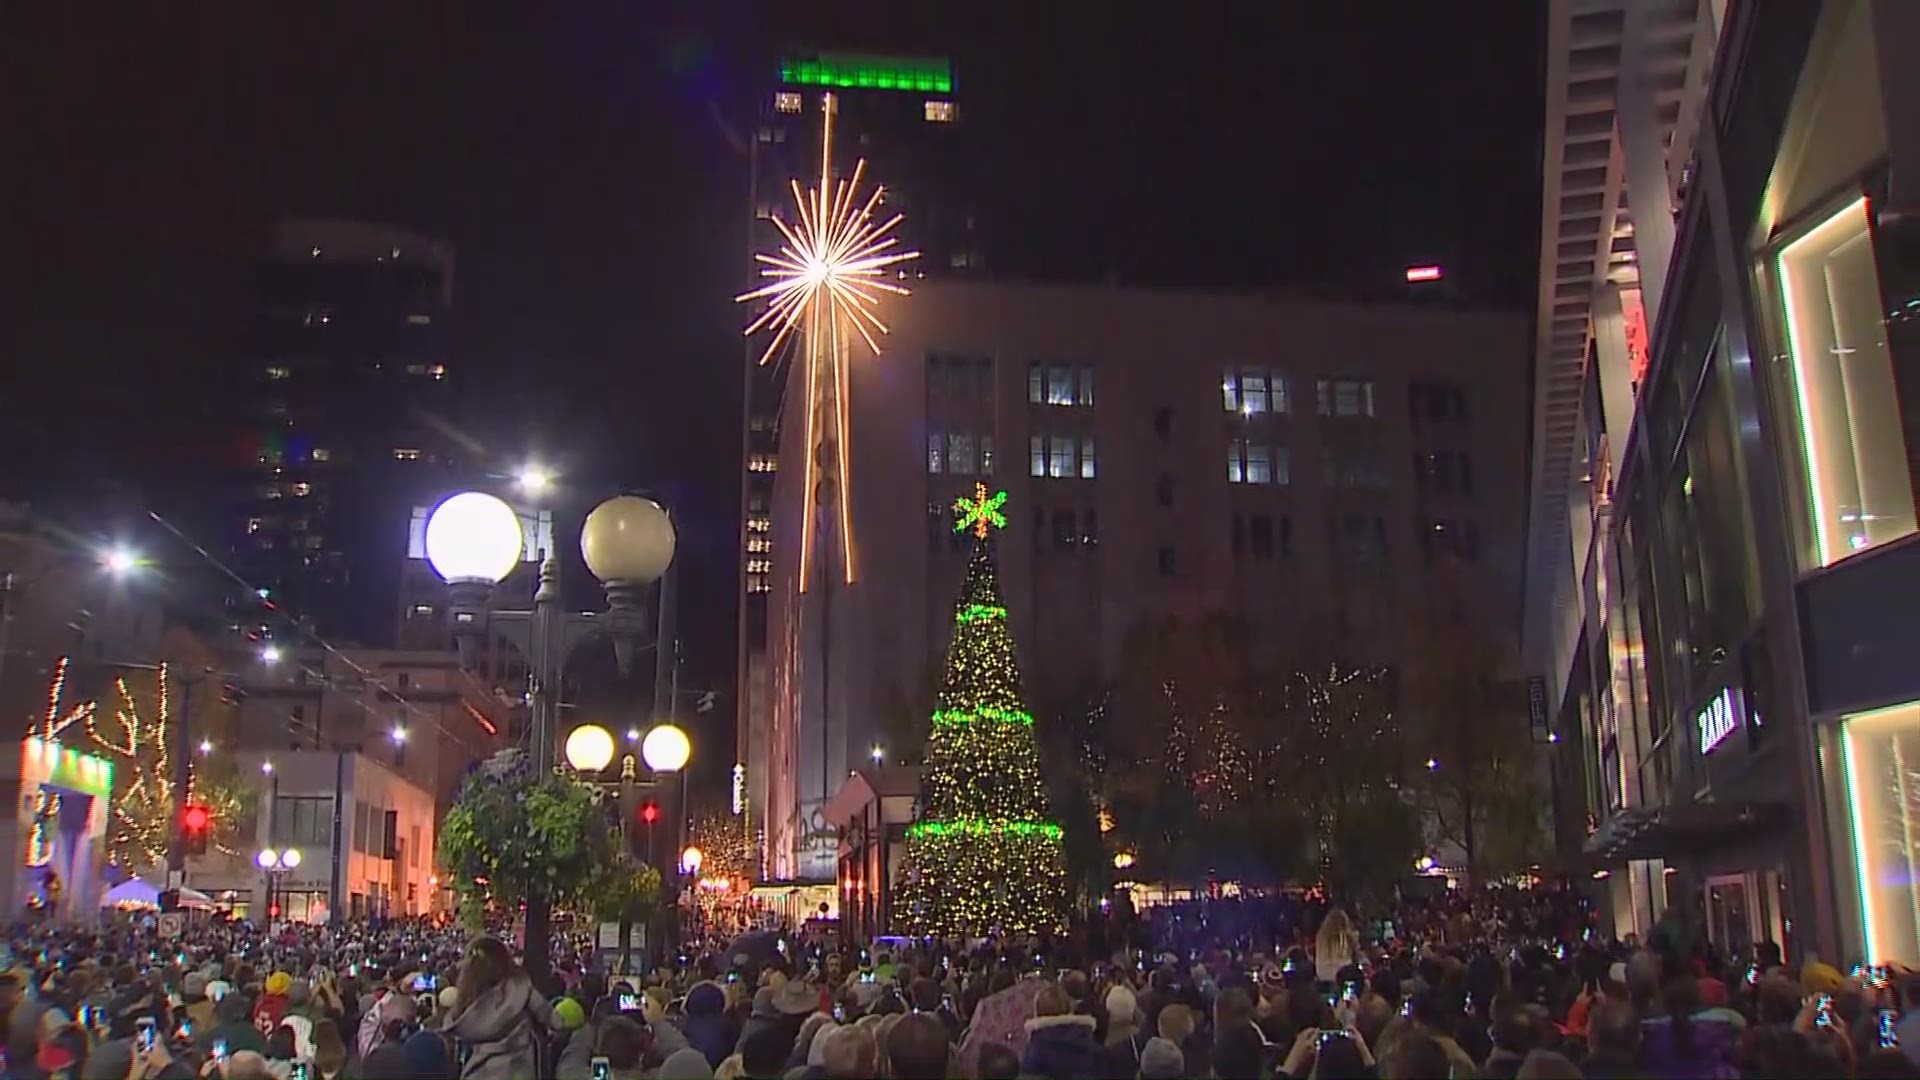 The Macy's Star lights up the day after Thanksgiving, kicking off the holiday season in downtown Seattle.